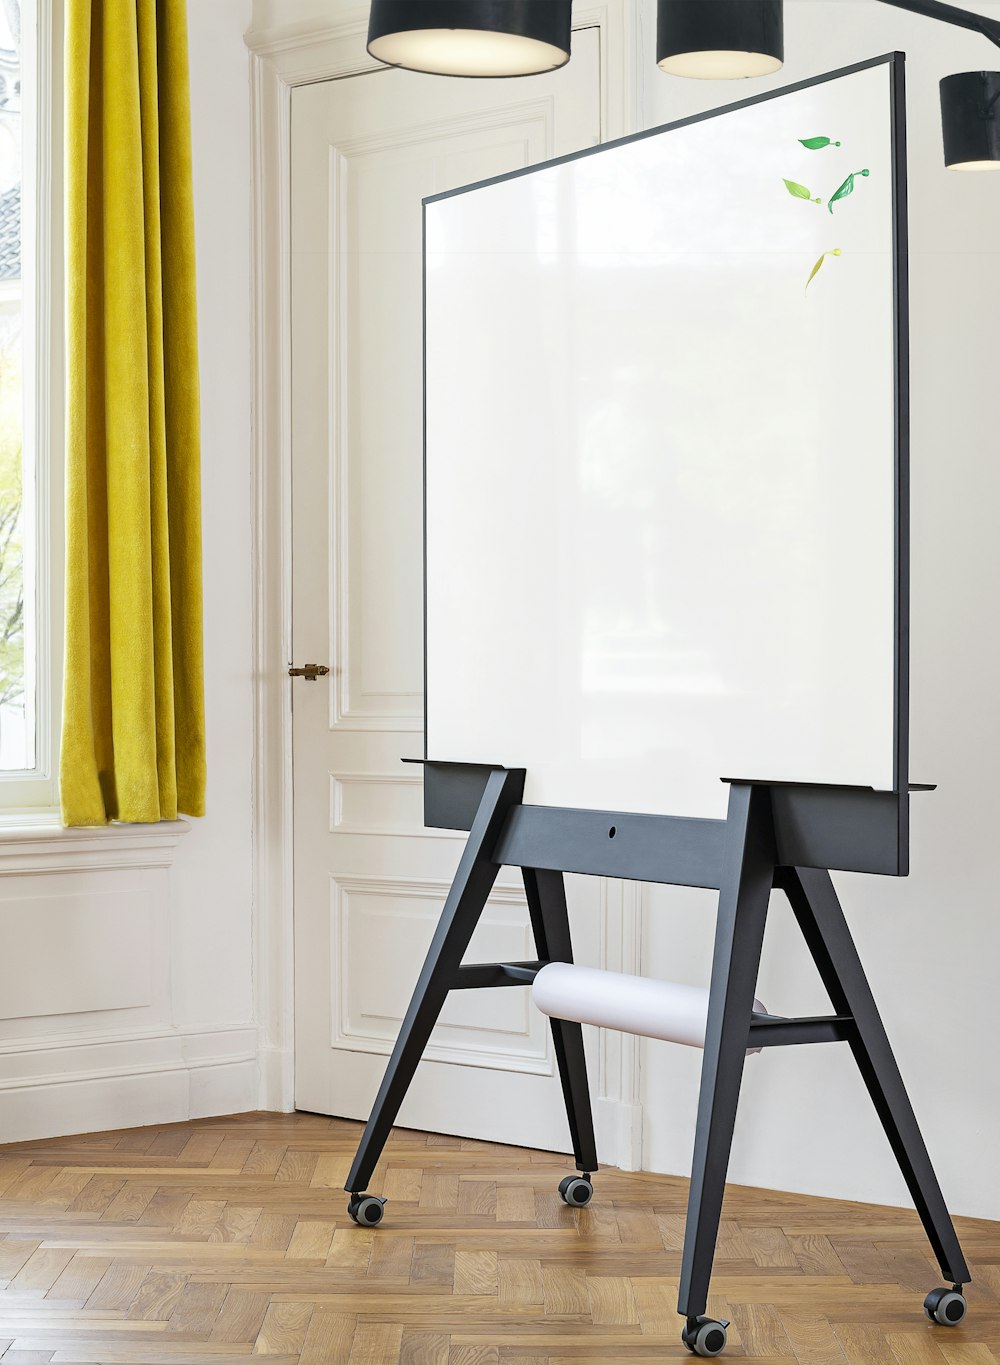 a white board sitting on top of a wooden floor